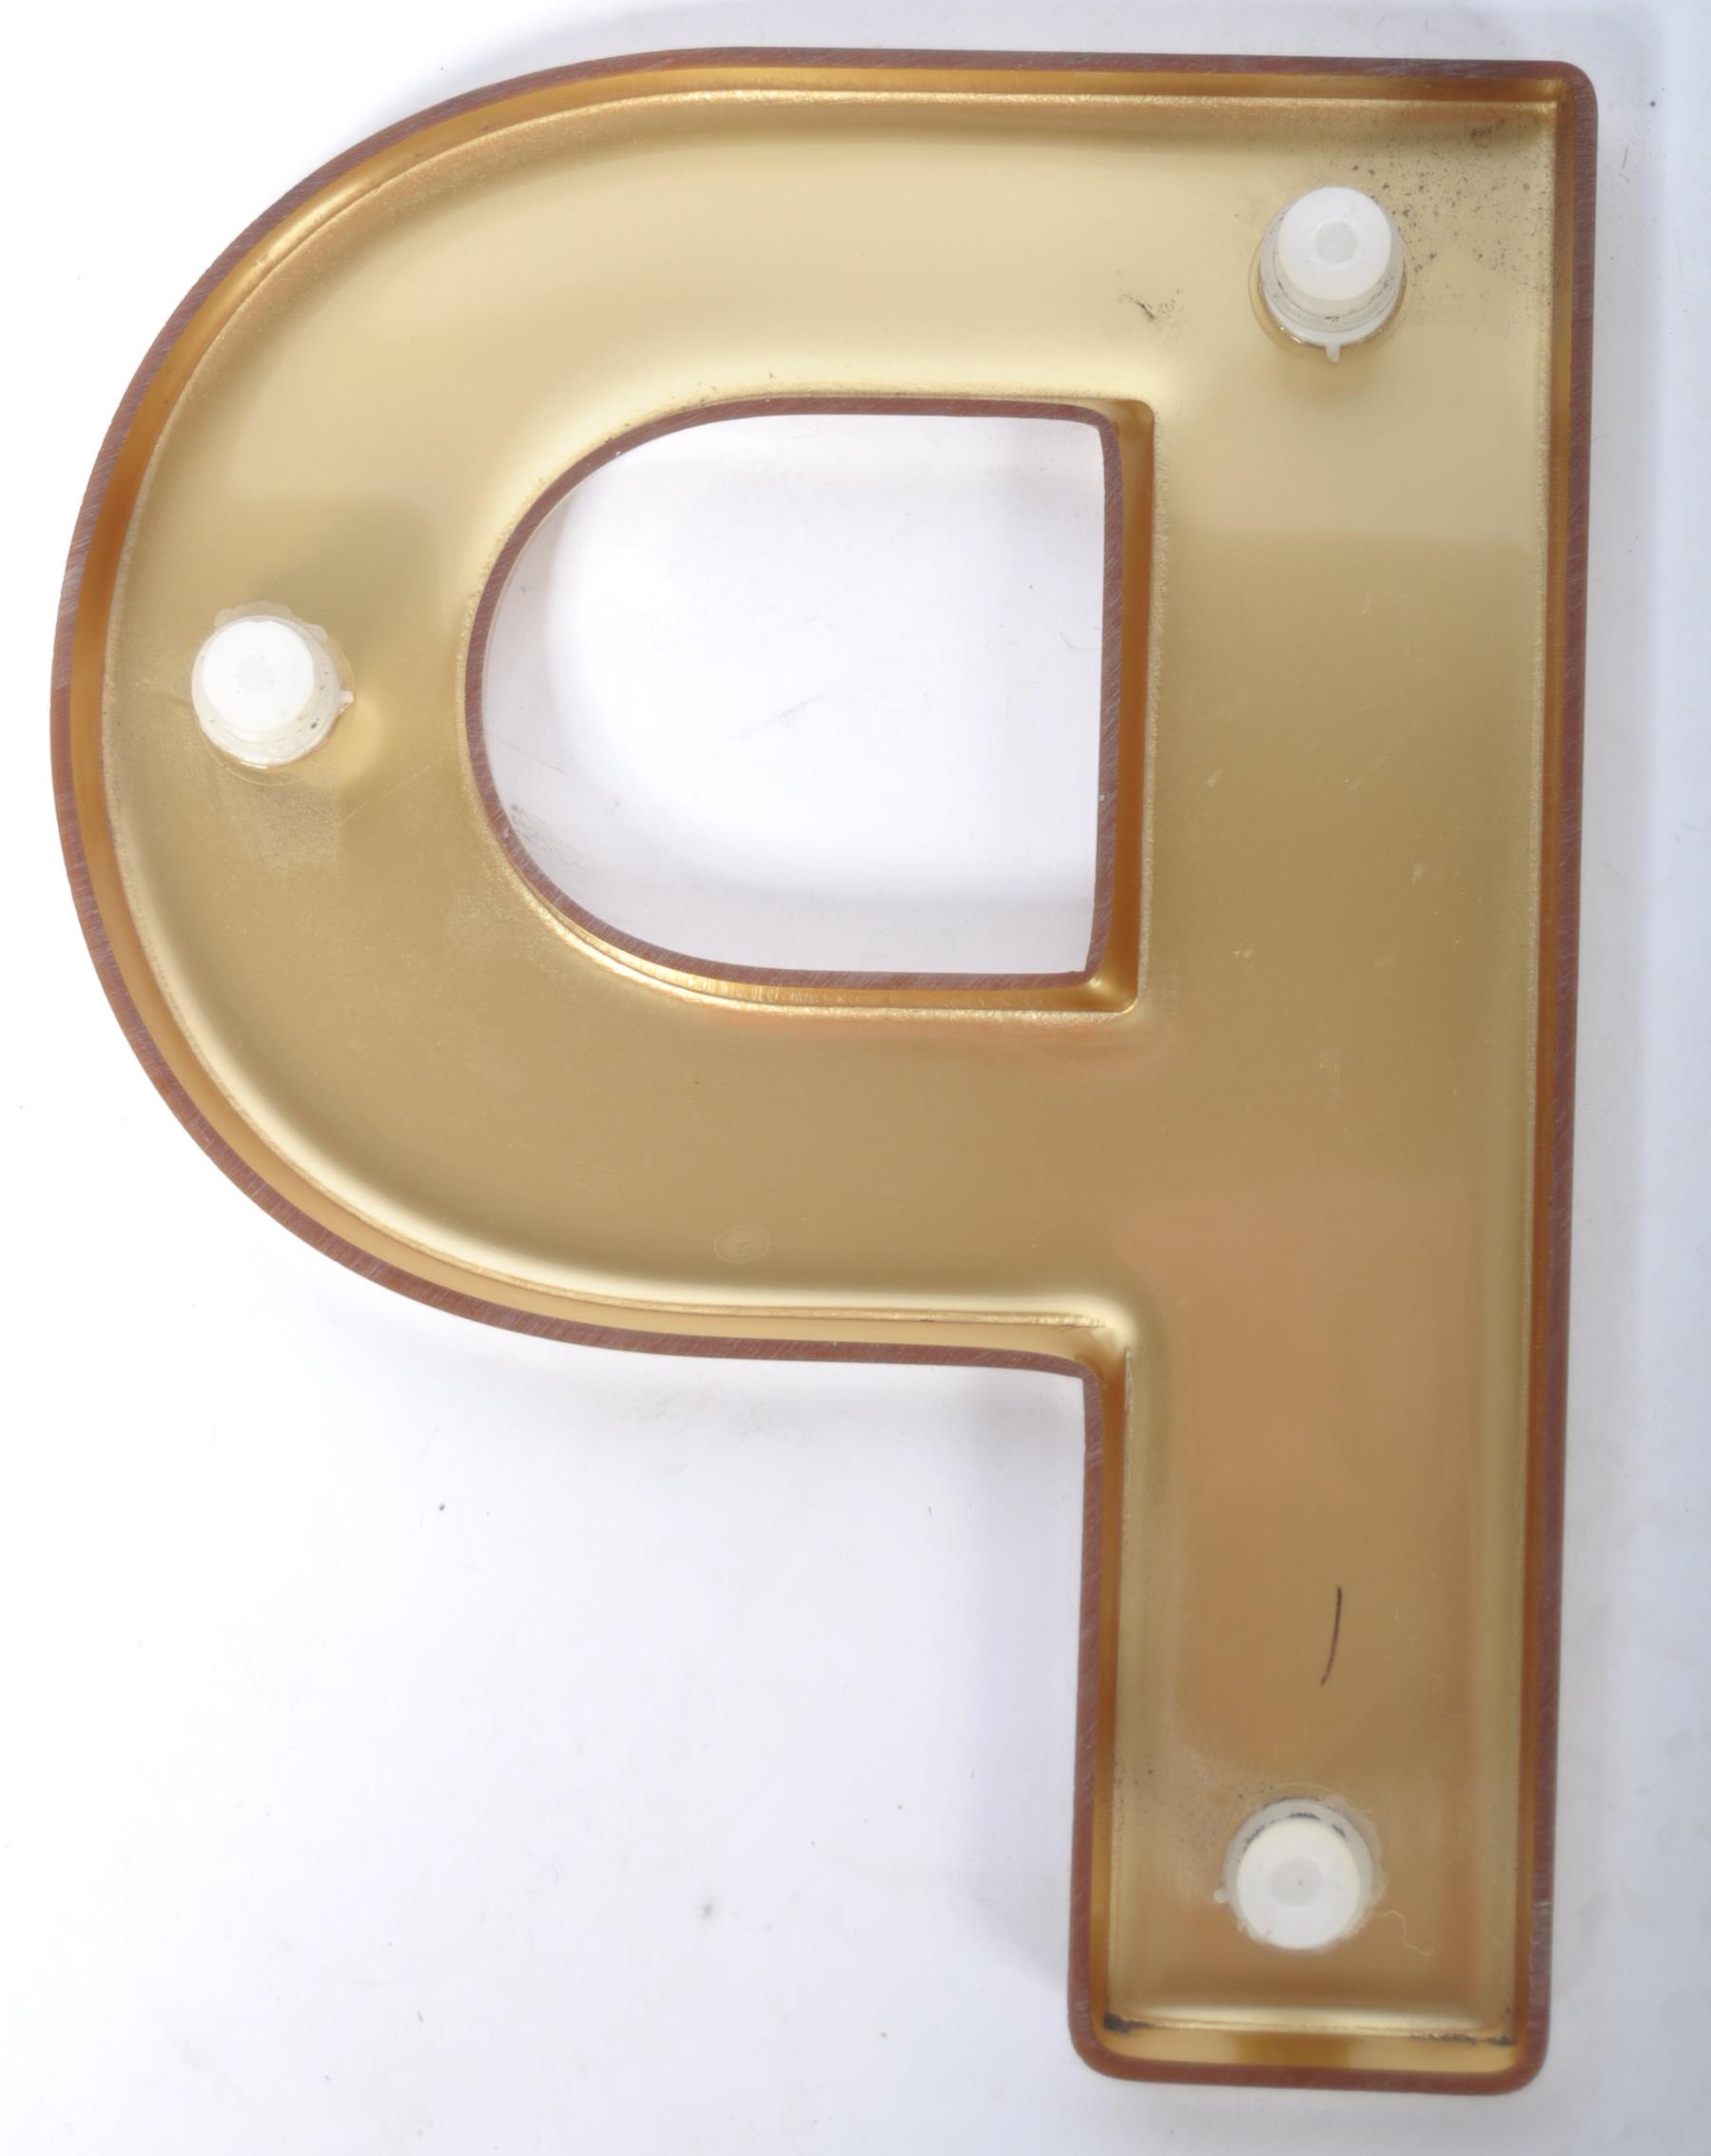 PRIVATE SHOP GOLD COLOURWAY ADVERTISING ACRYLIC LETTERS - Image 2 of 2